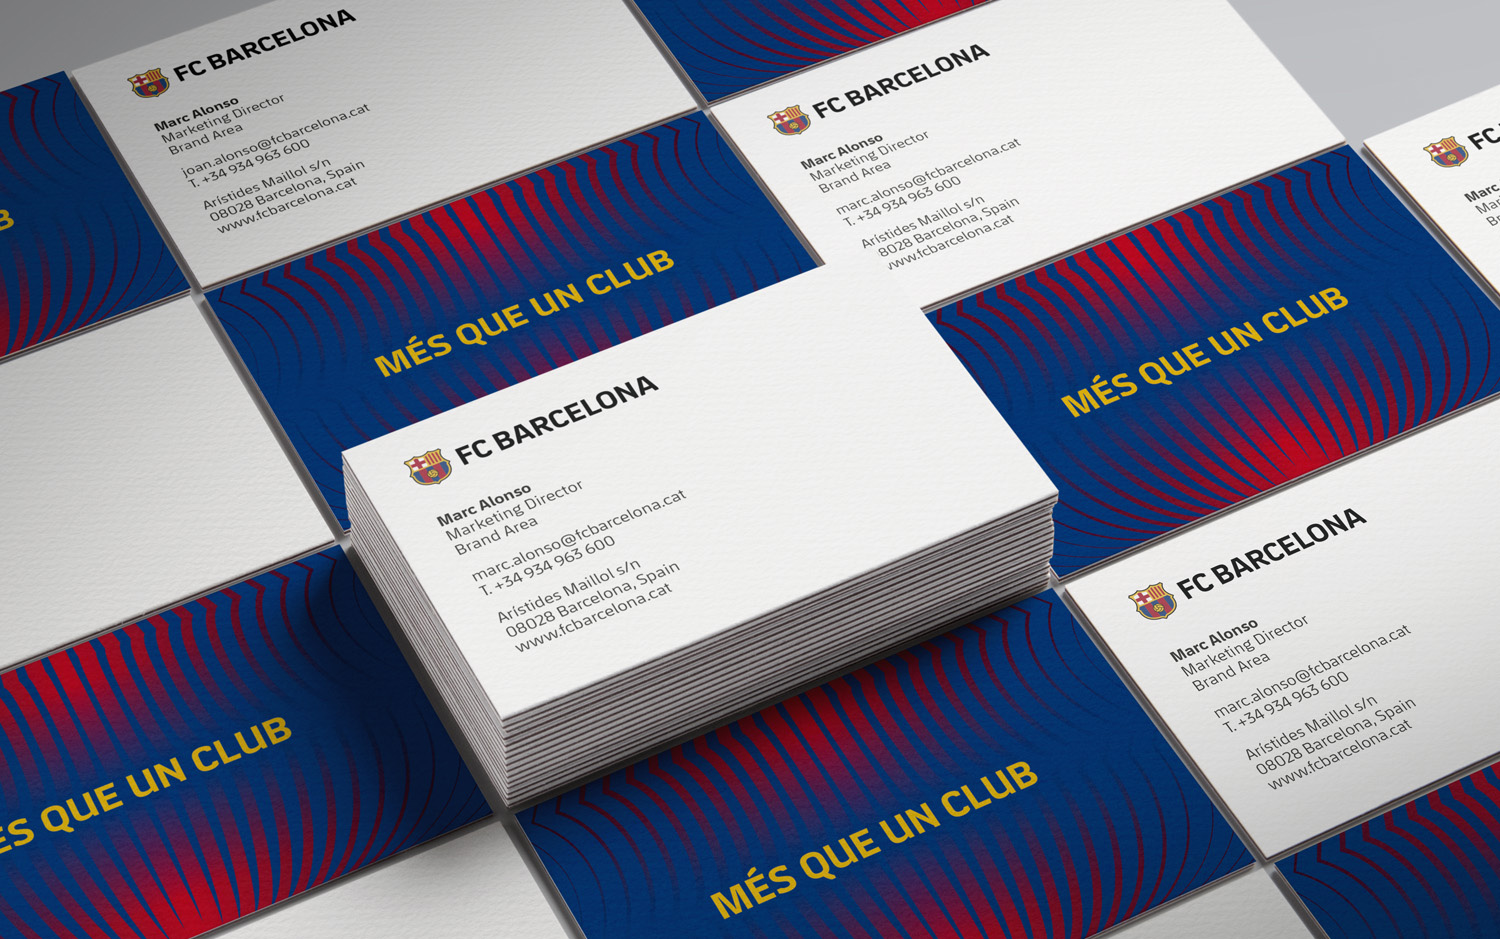 Brand New: New Crest and Identity for FC Barcelona by Summa